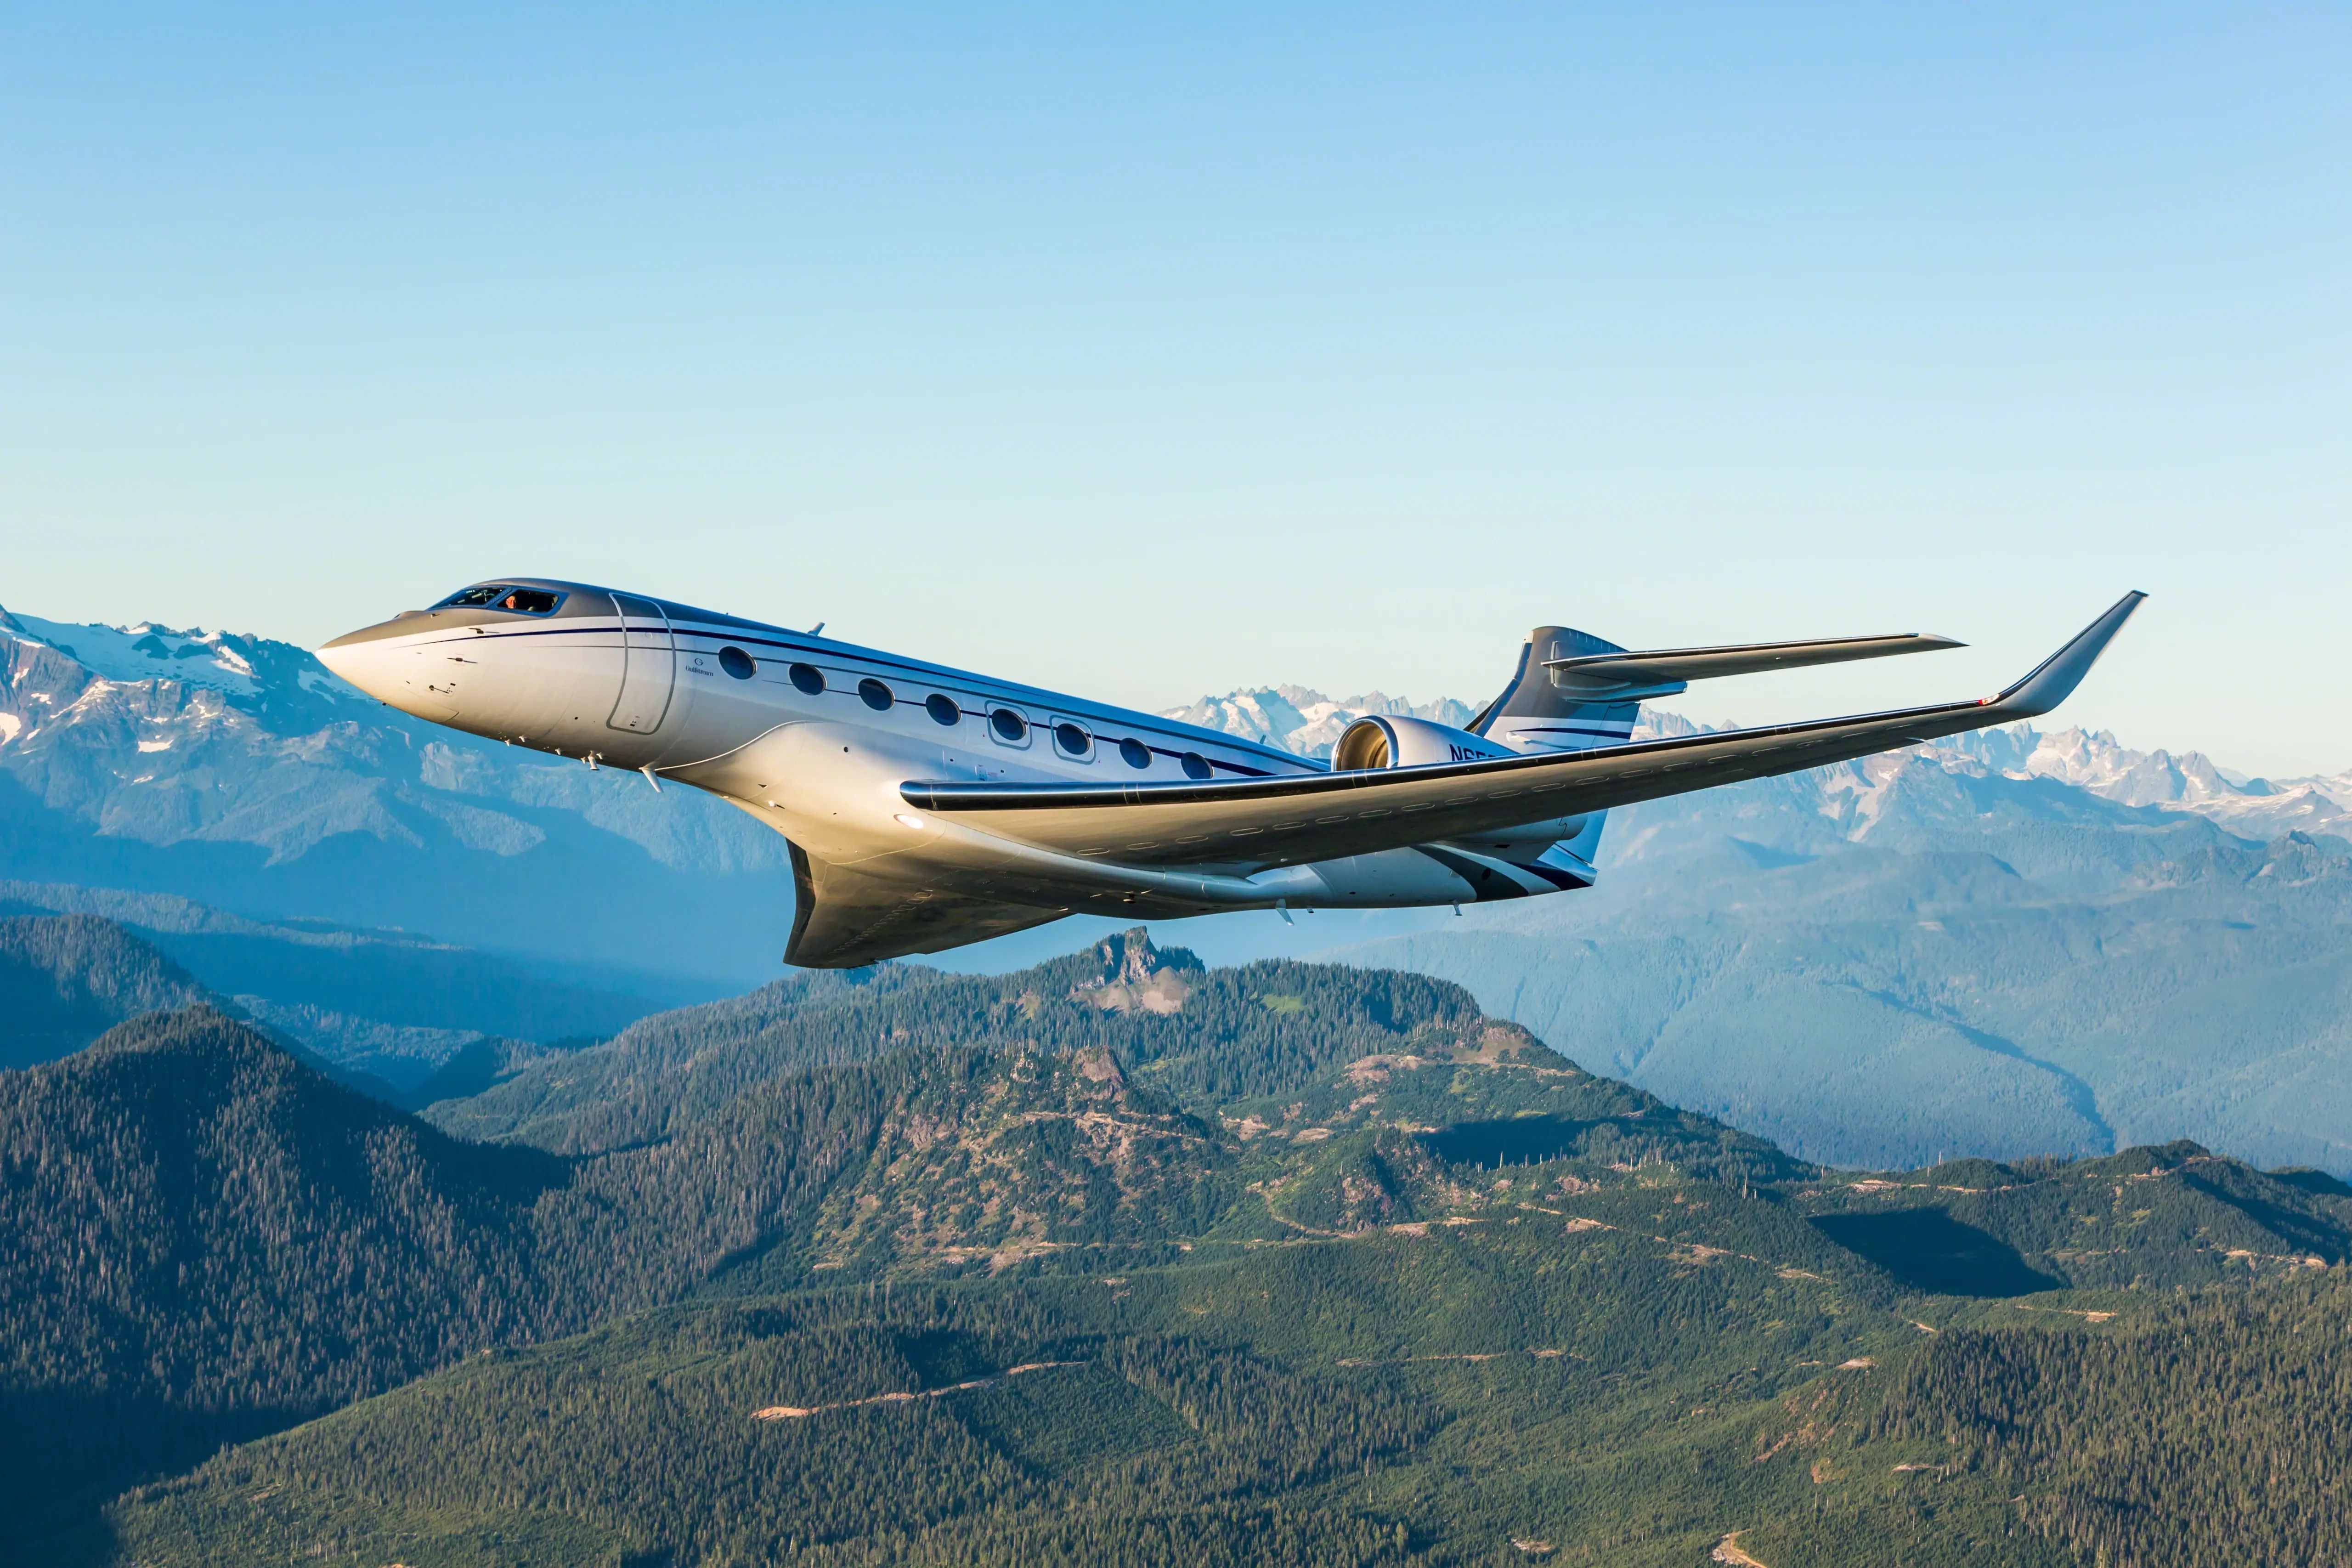 Gulfstream G650 in the air against mountainous backdrop